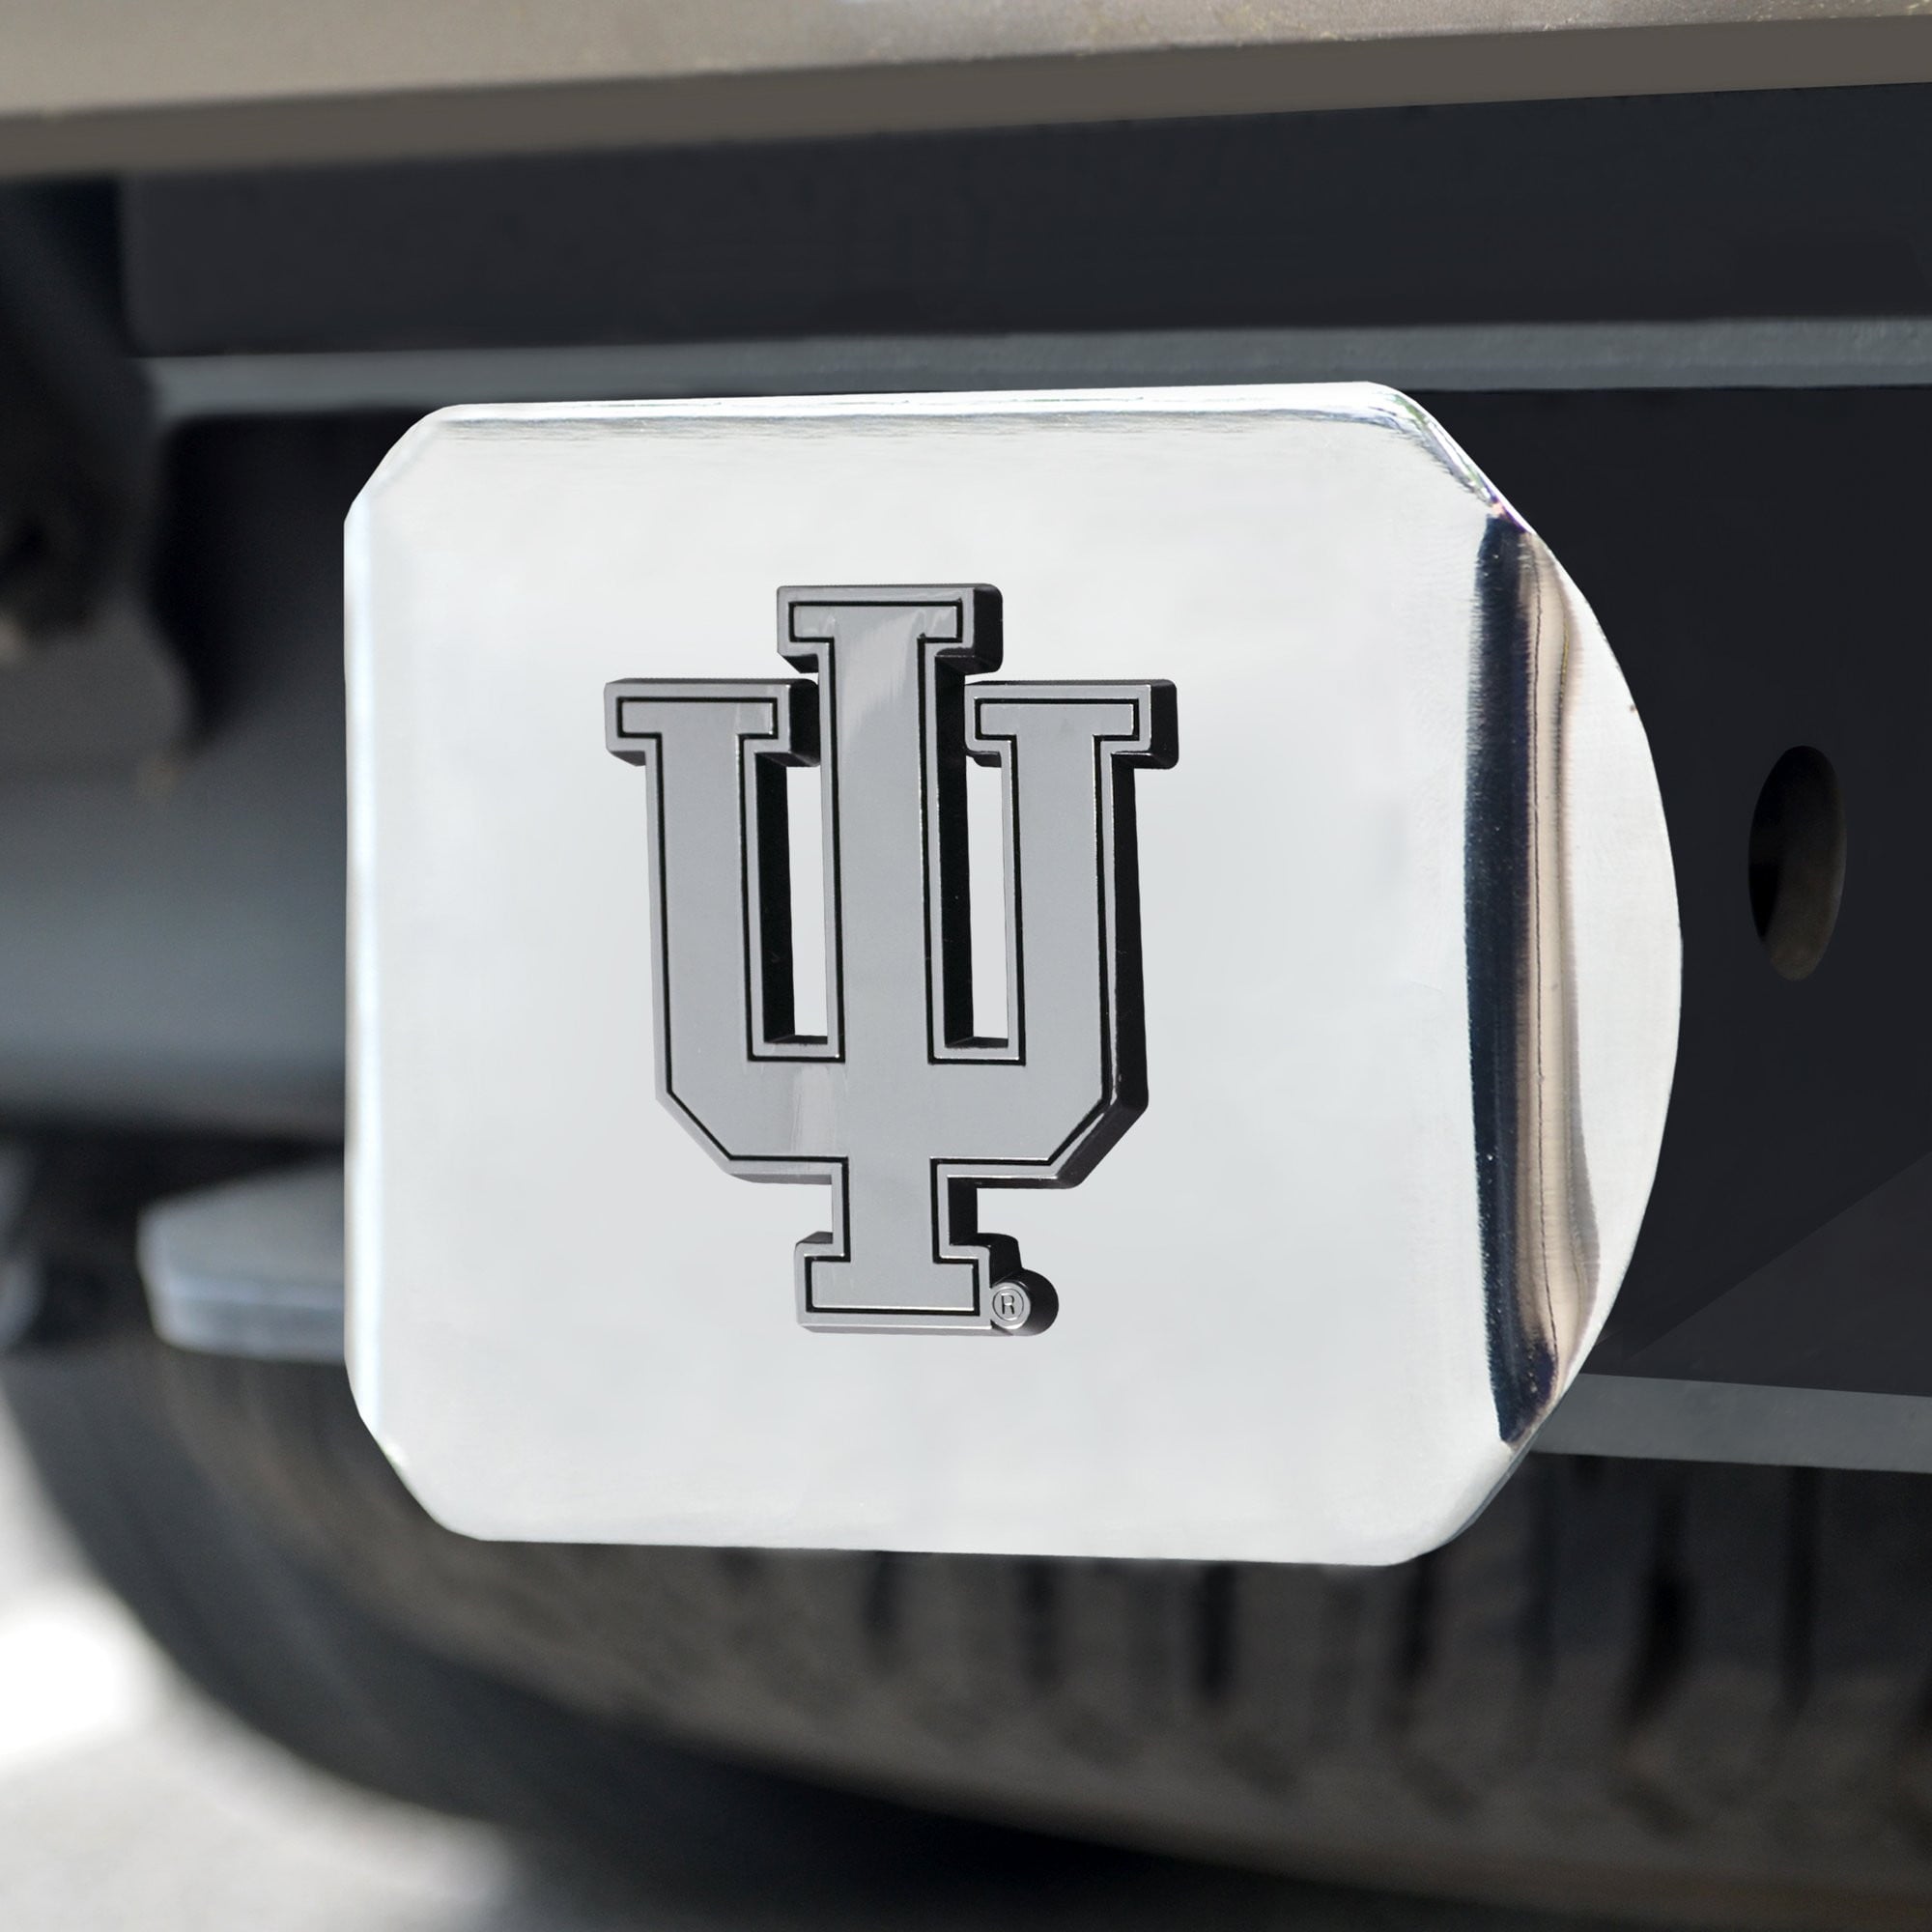 Indiana Hoosiers Chrome Hitch Cover 3.4